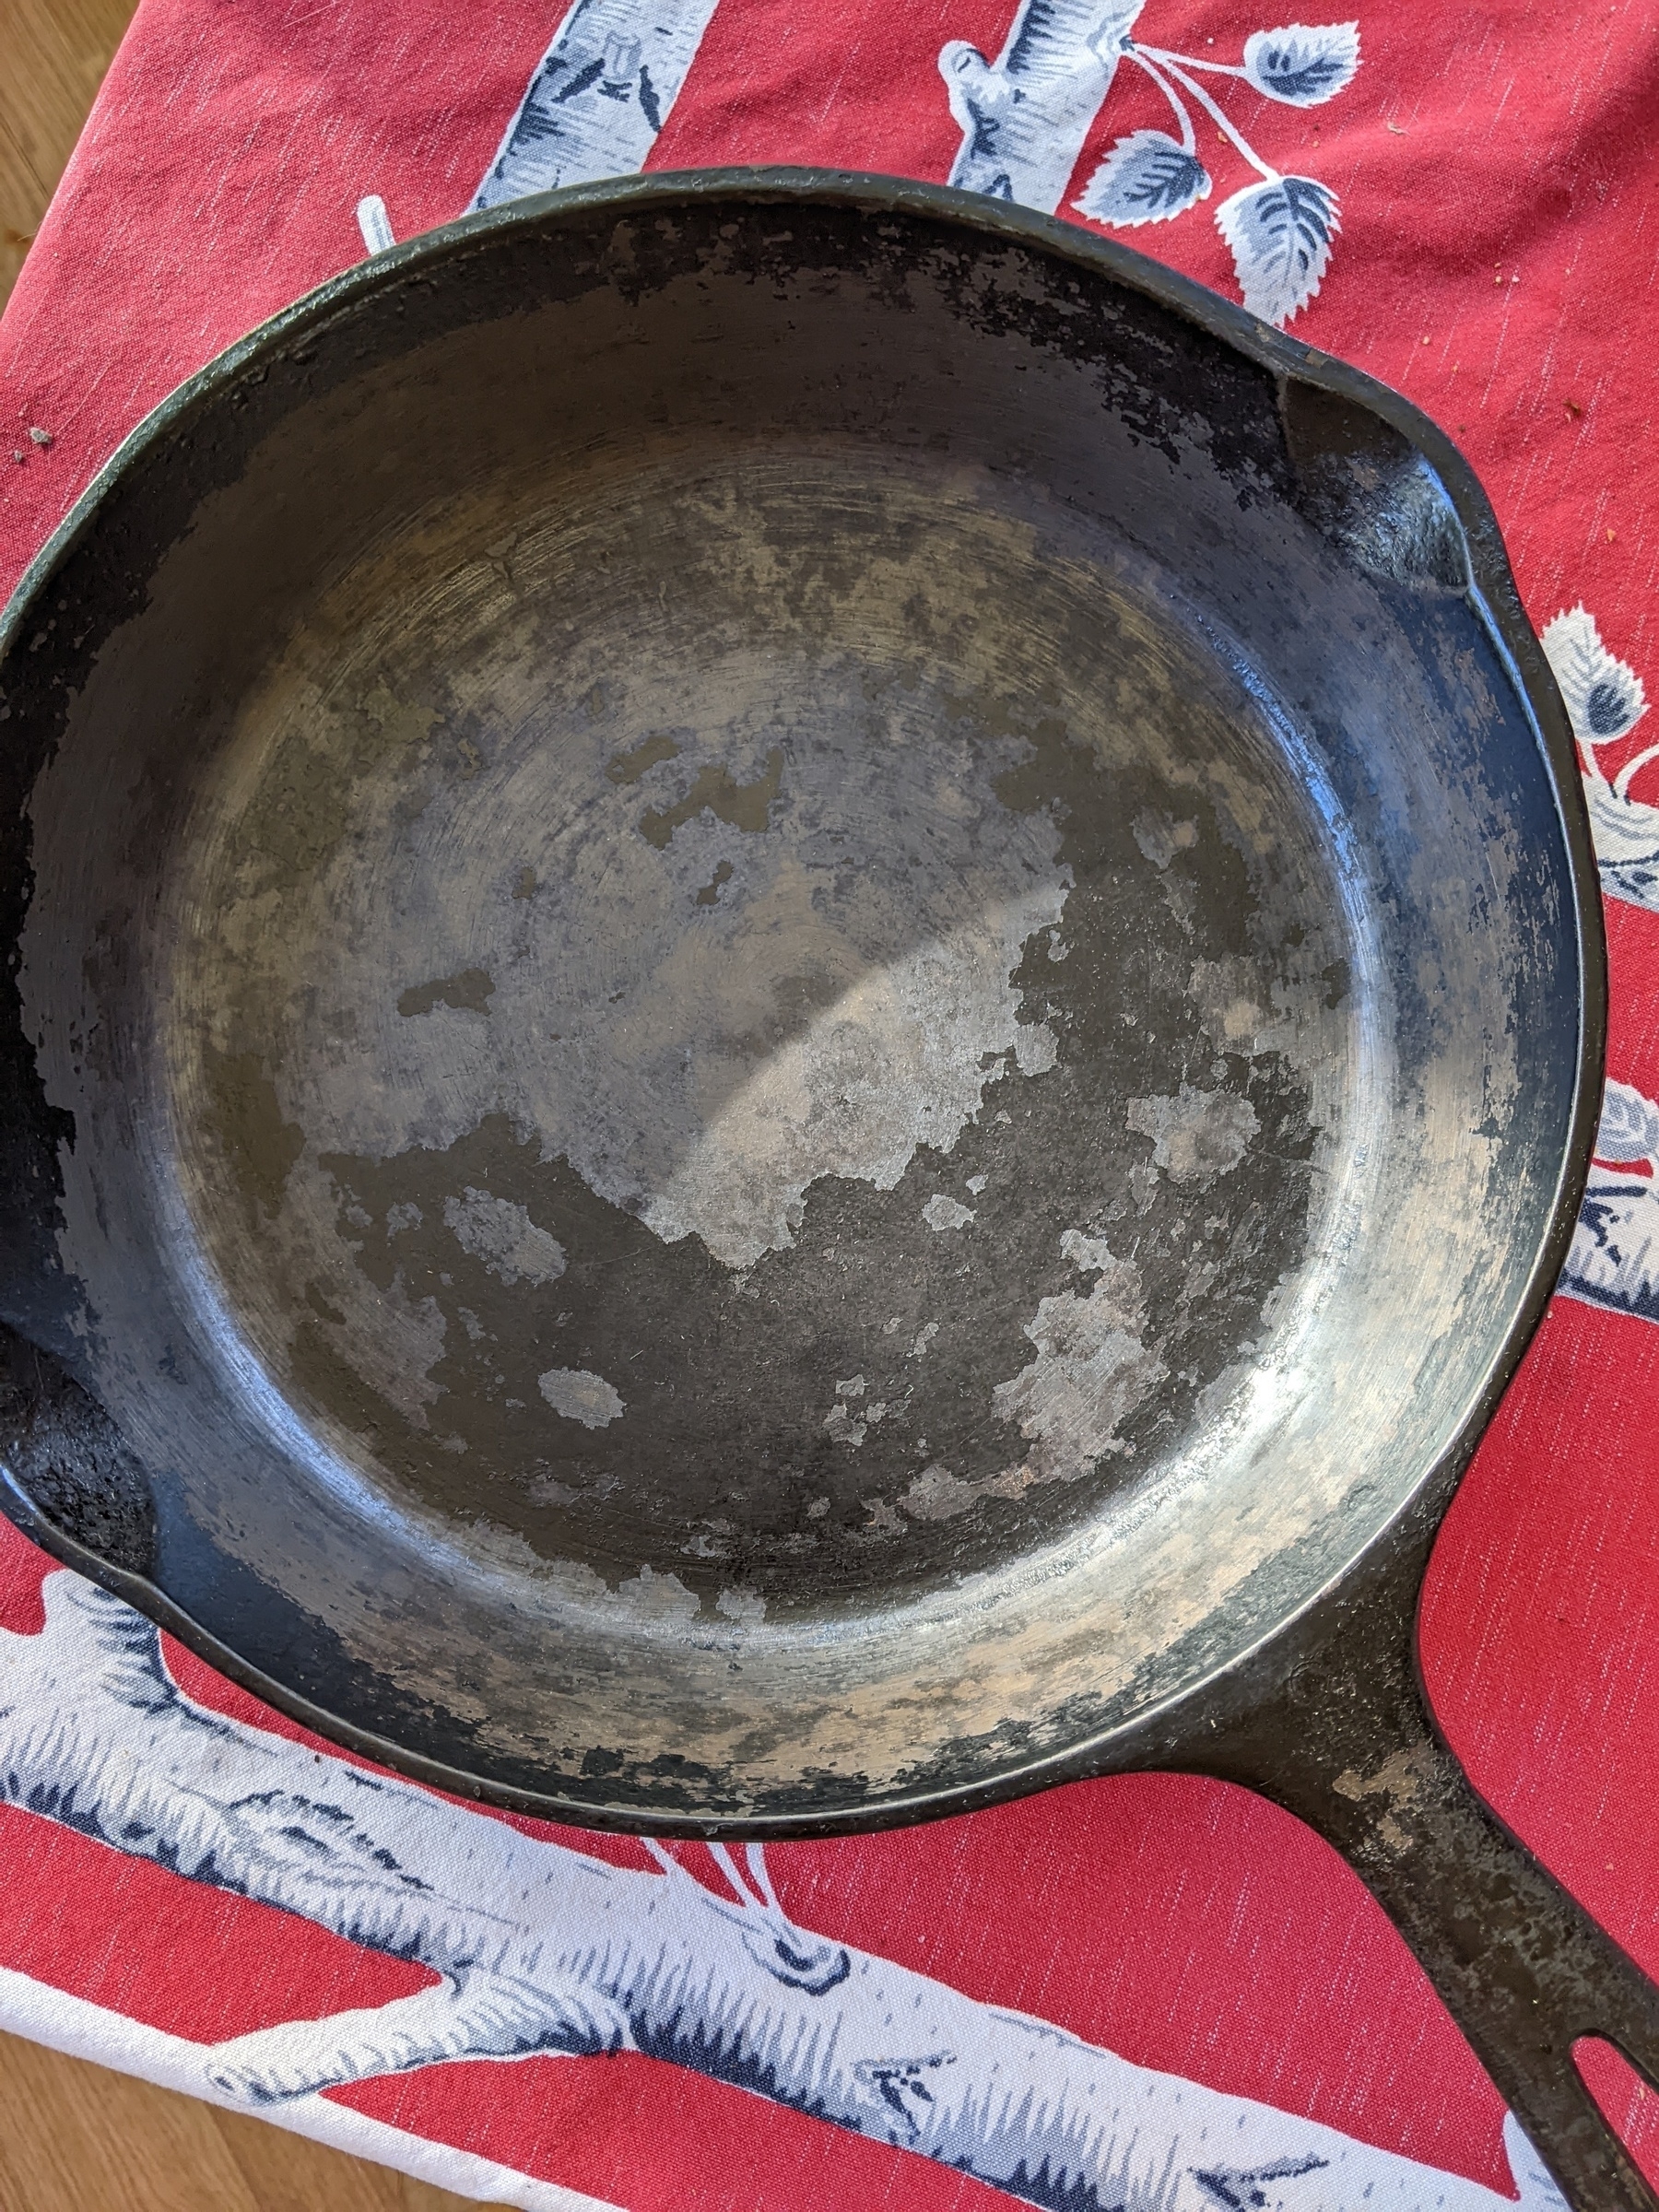 Stripped cast iron pan with flaking black finish